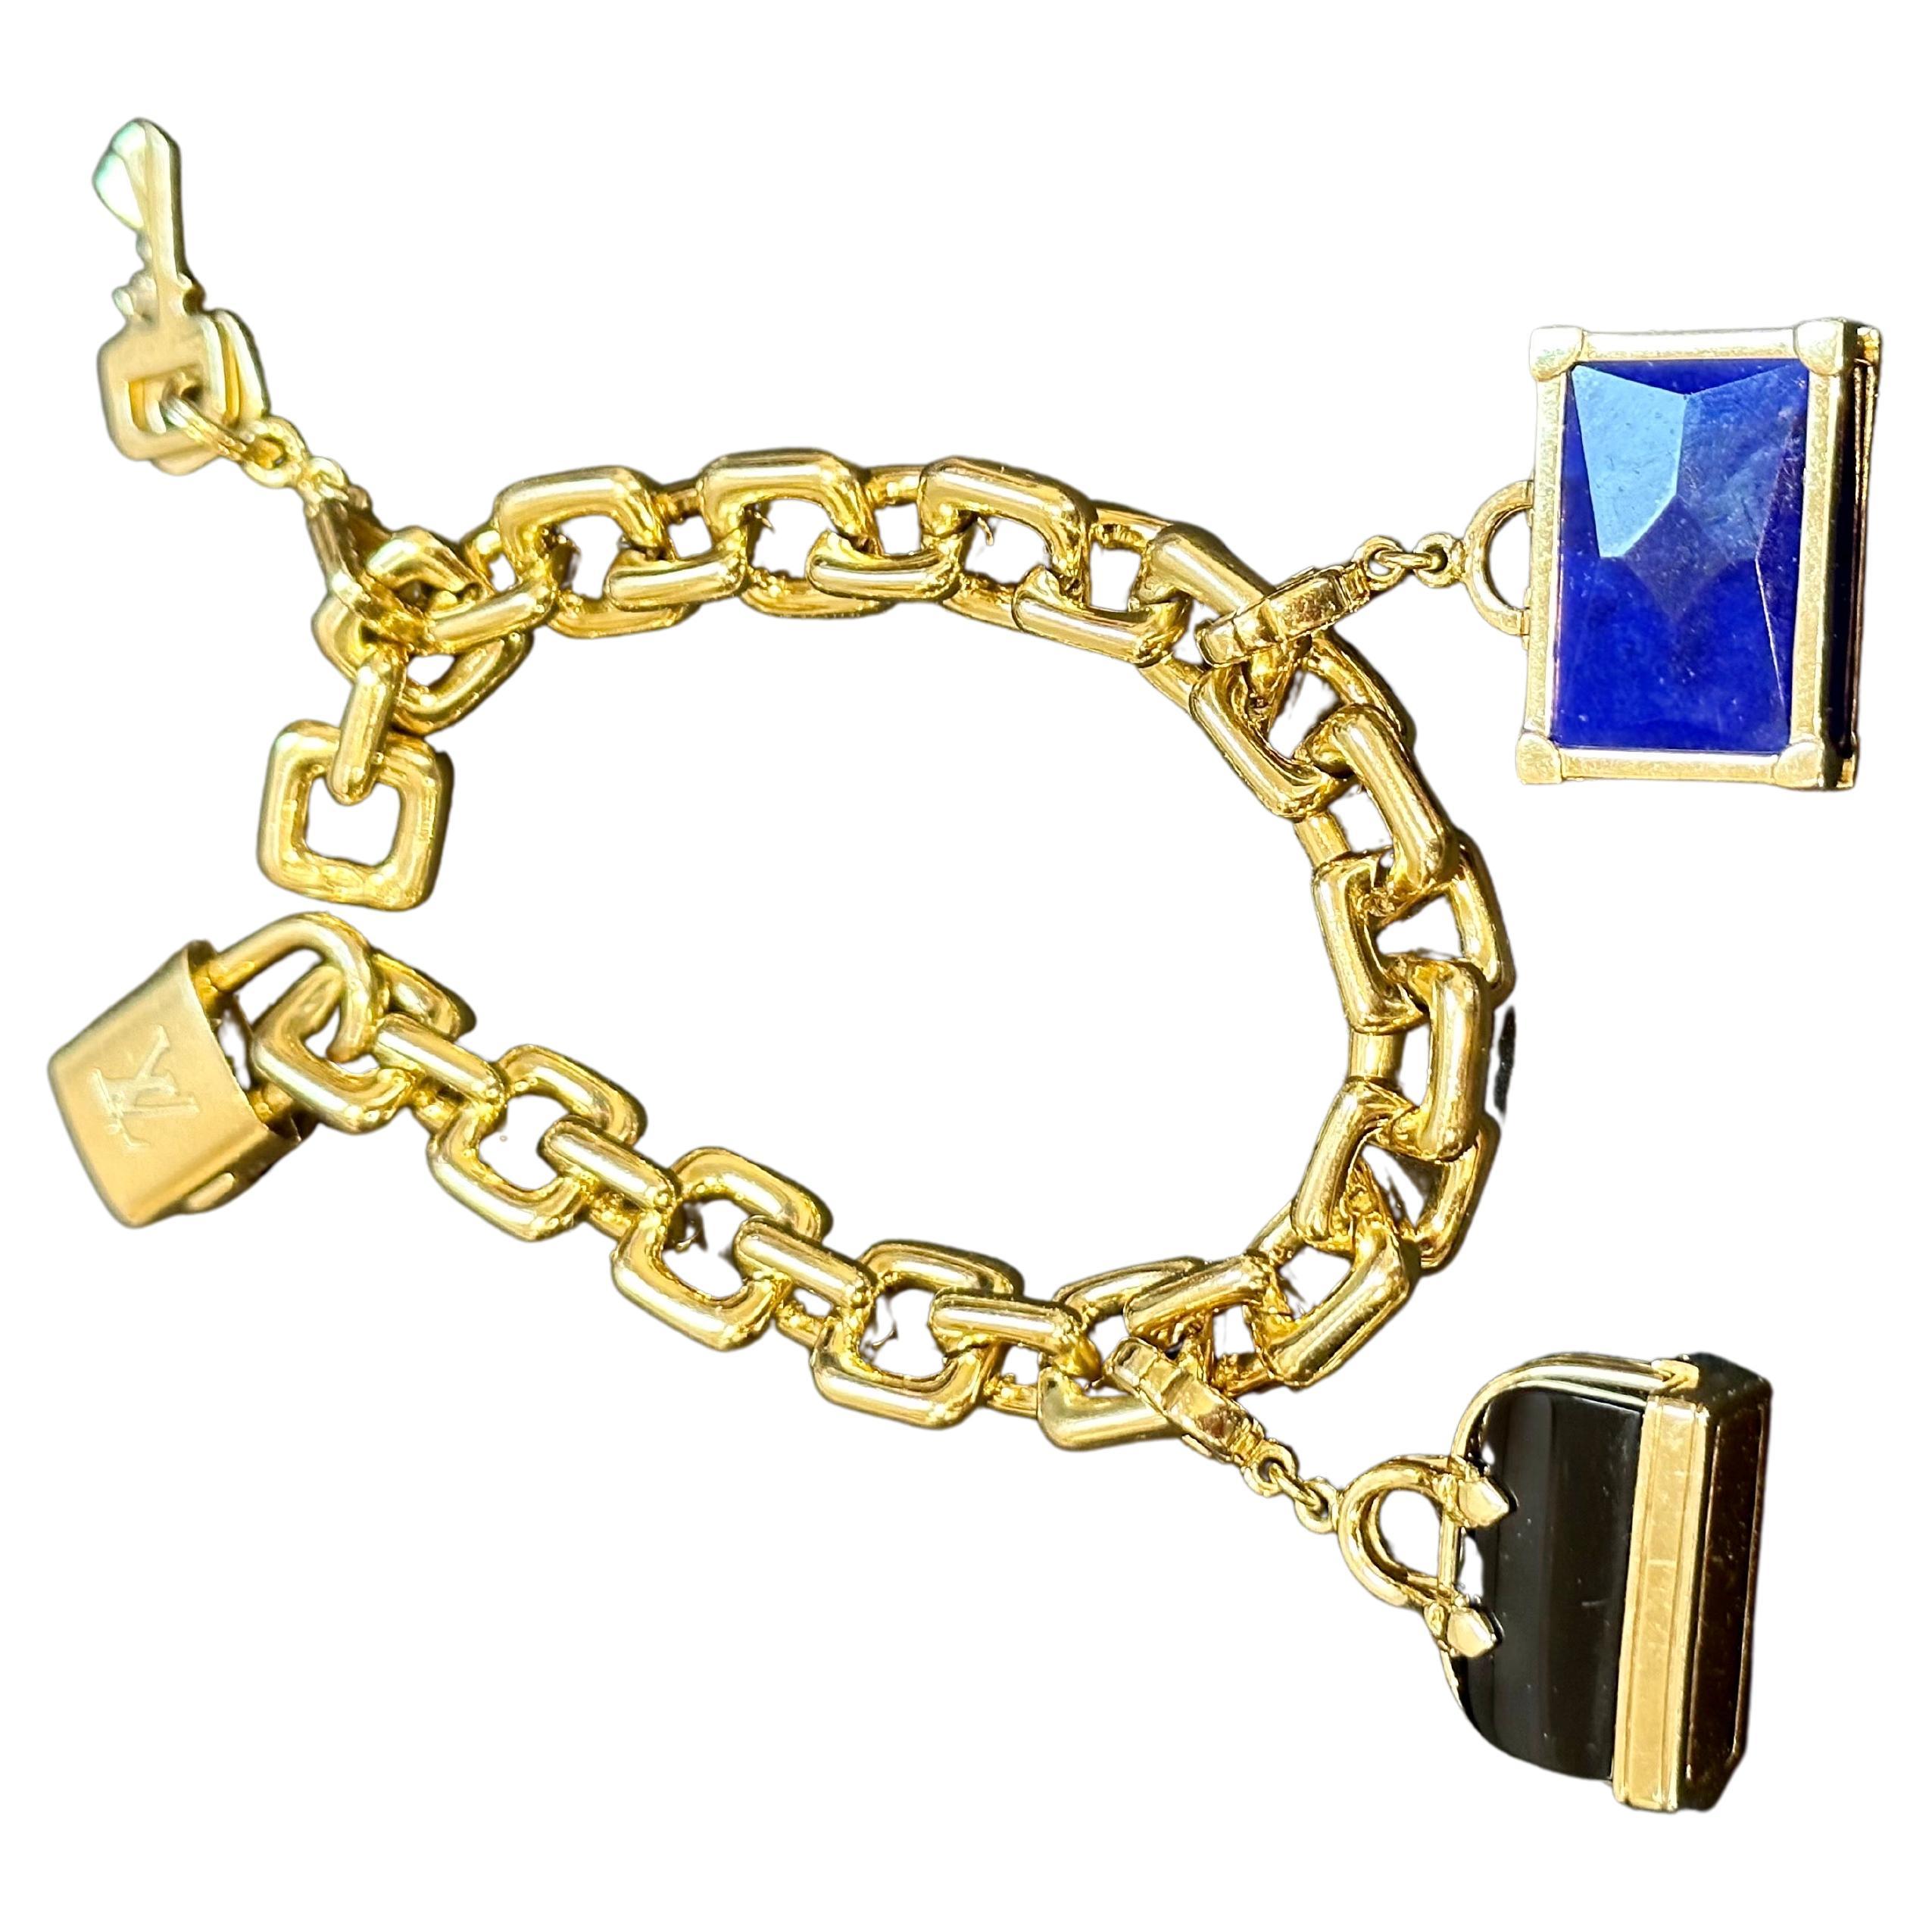 Louis Vuitton Padlock & Keys+ Two Bags Charm Yellow Gold Bracelet 125.7 Gm 18 KG
Unisex

Comprised of square shaped cable link chain with suspending lock and key charms
Lock is functional via press release closure and is engraved with brand logo
Key